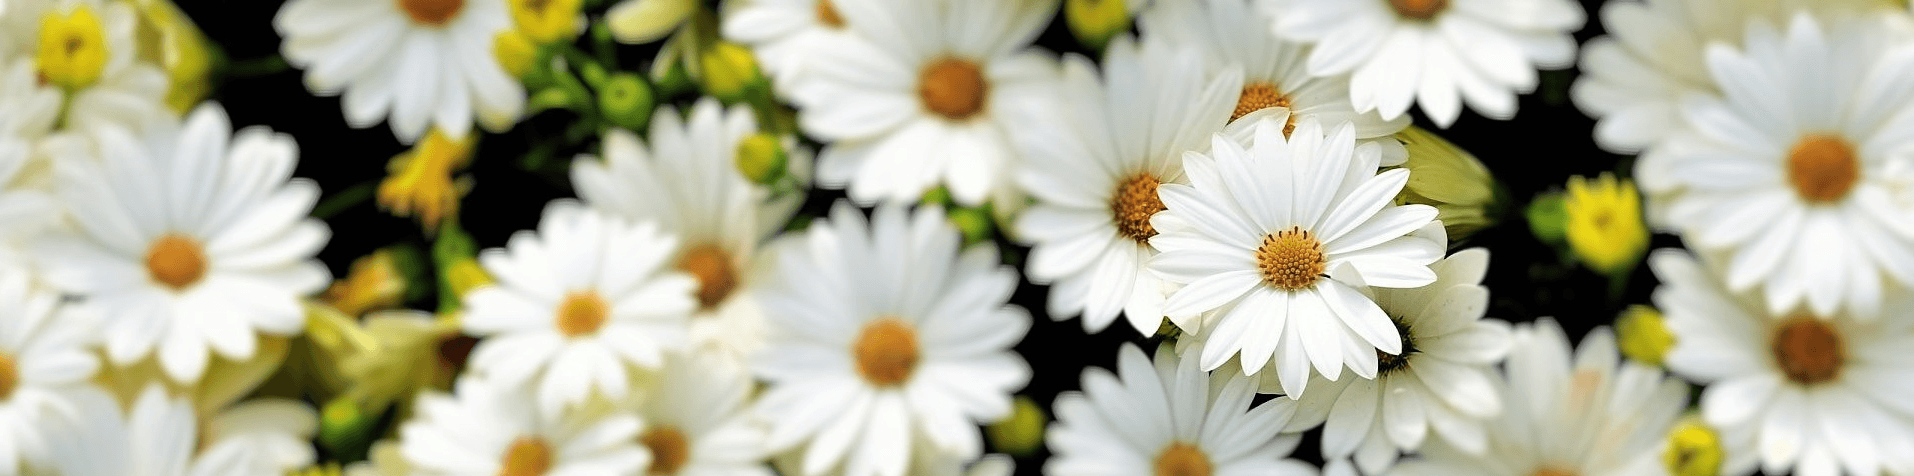 banner picture - close-up of daisies - a further flower in focus